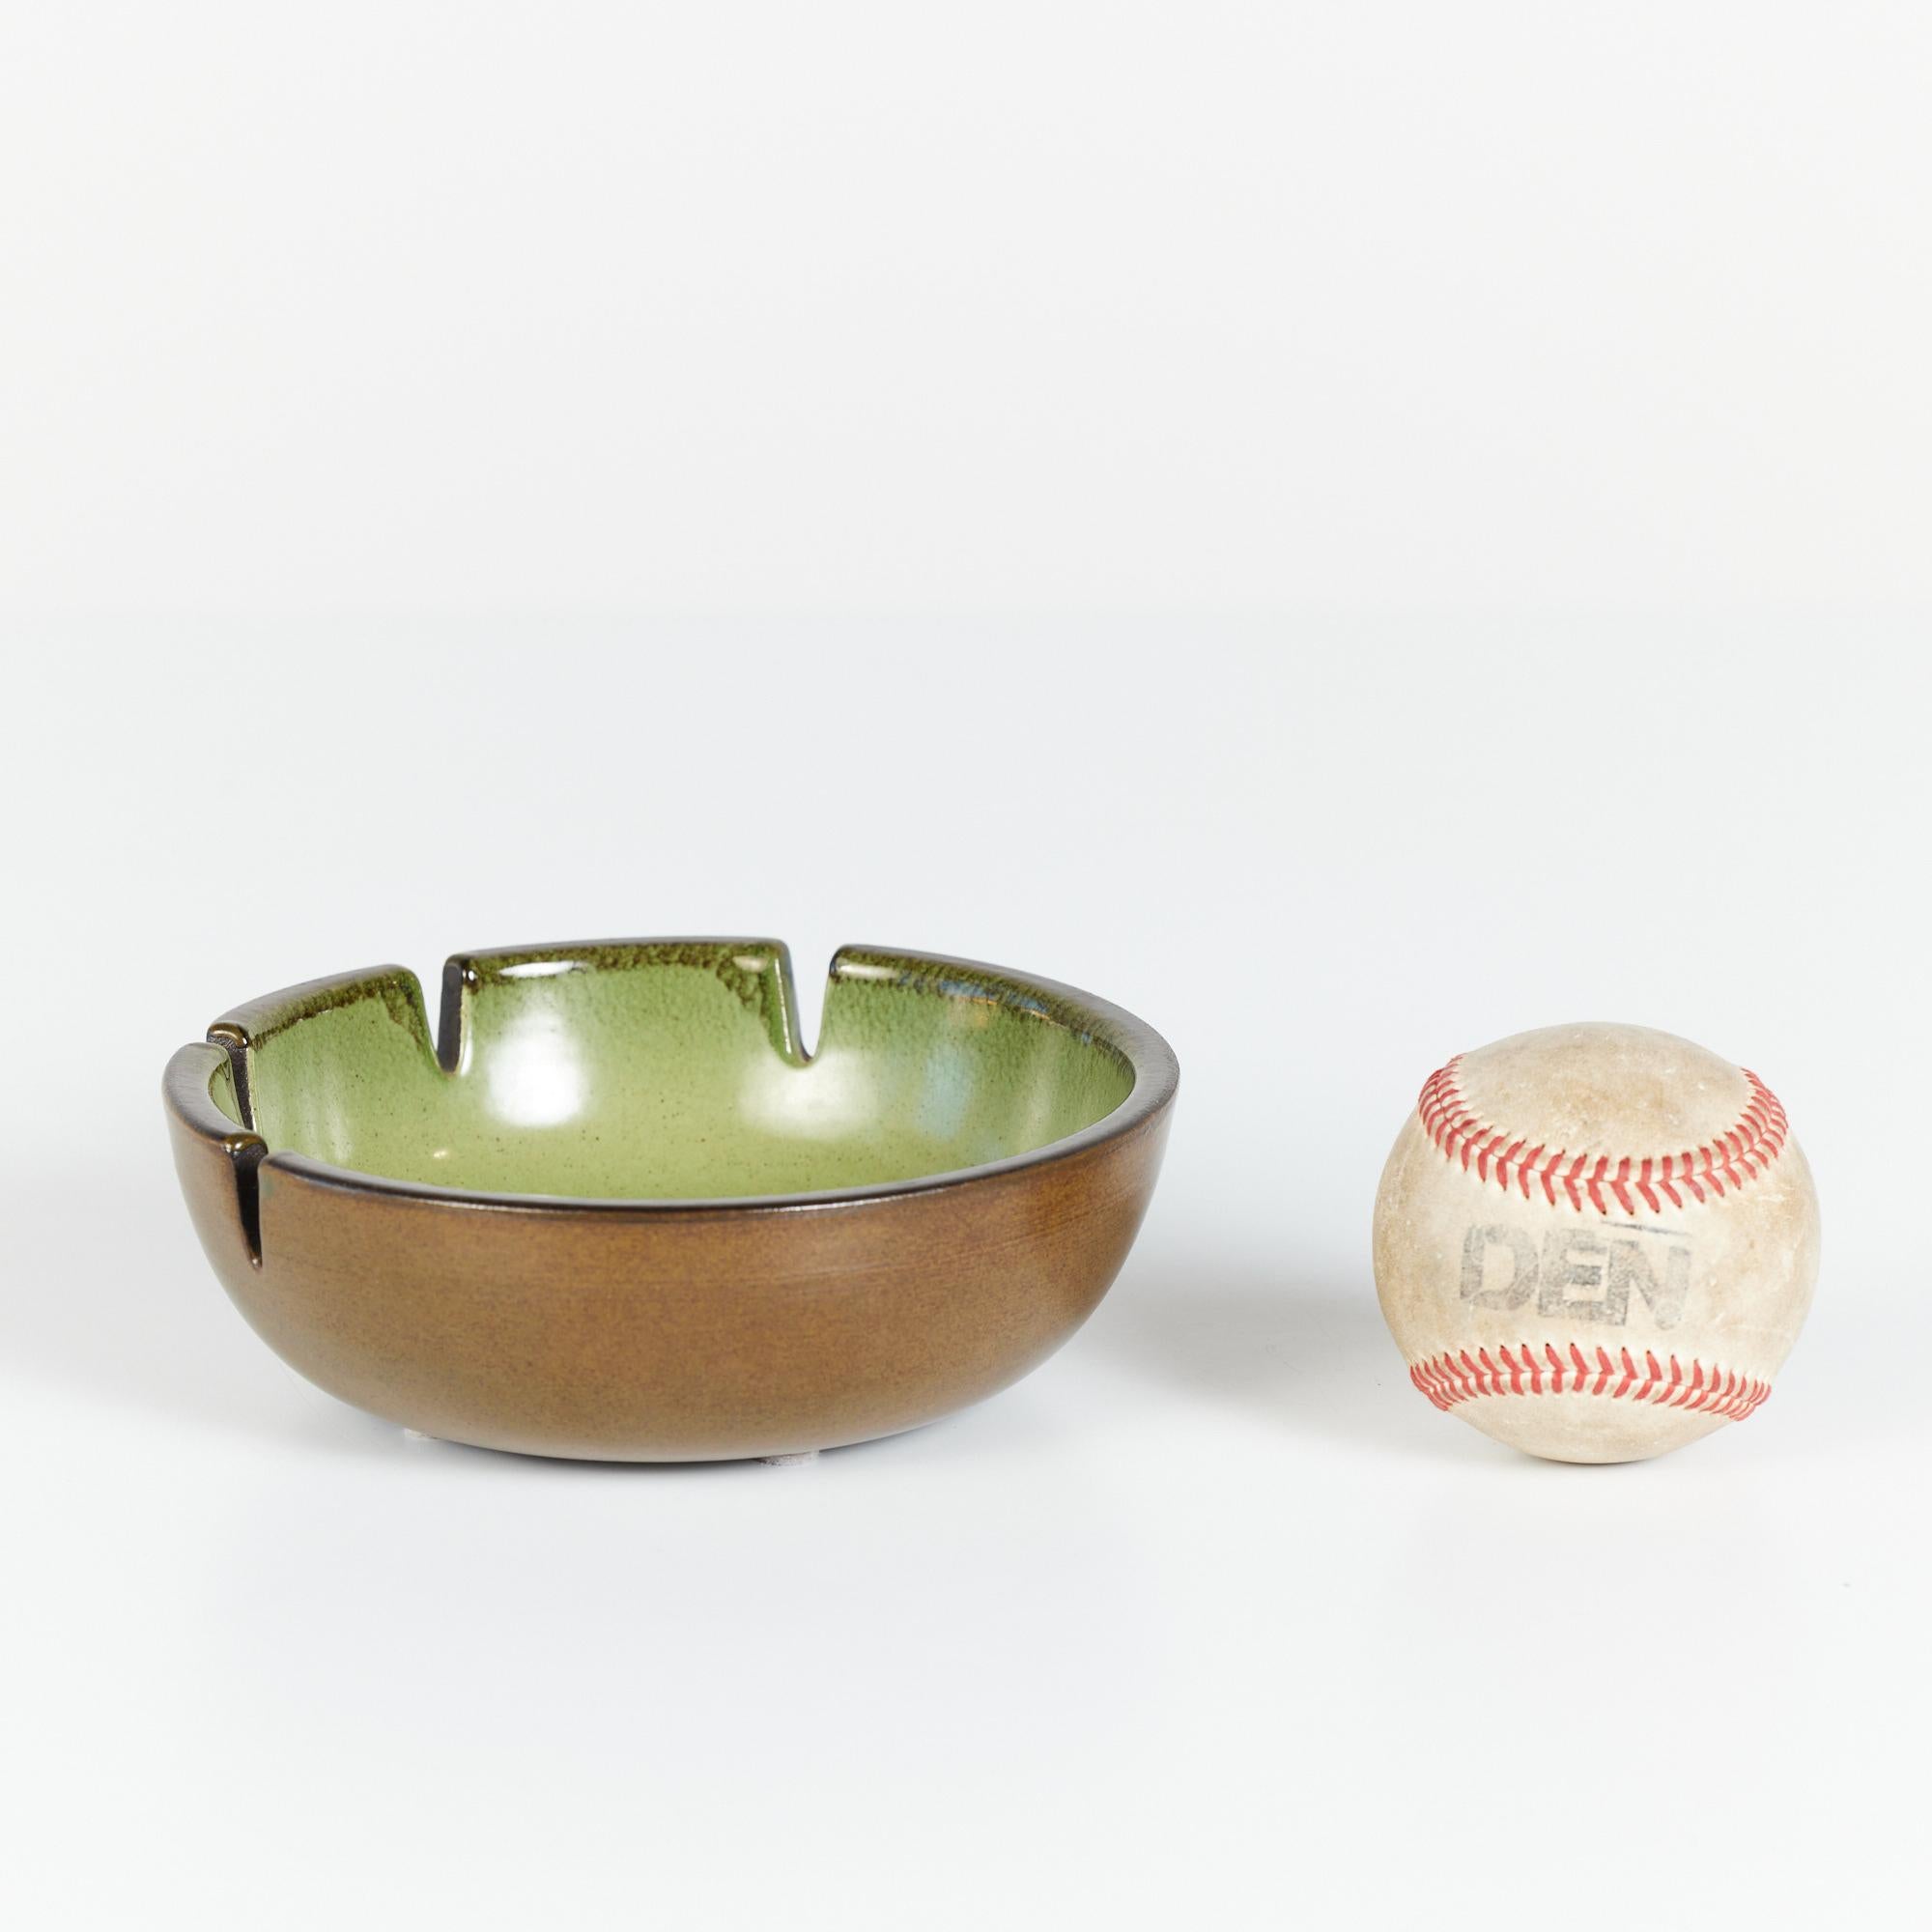 Glazed ceramic ashtray by Heath Ceramics, c.1960s, USA. The ashtray features a dark green exterior glaze and light green speckle glazed interior. There are four holding slots for cigarettes. Can also be used as a decorative catchall or soap